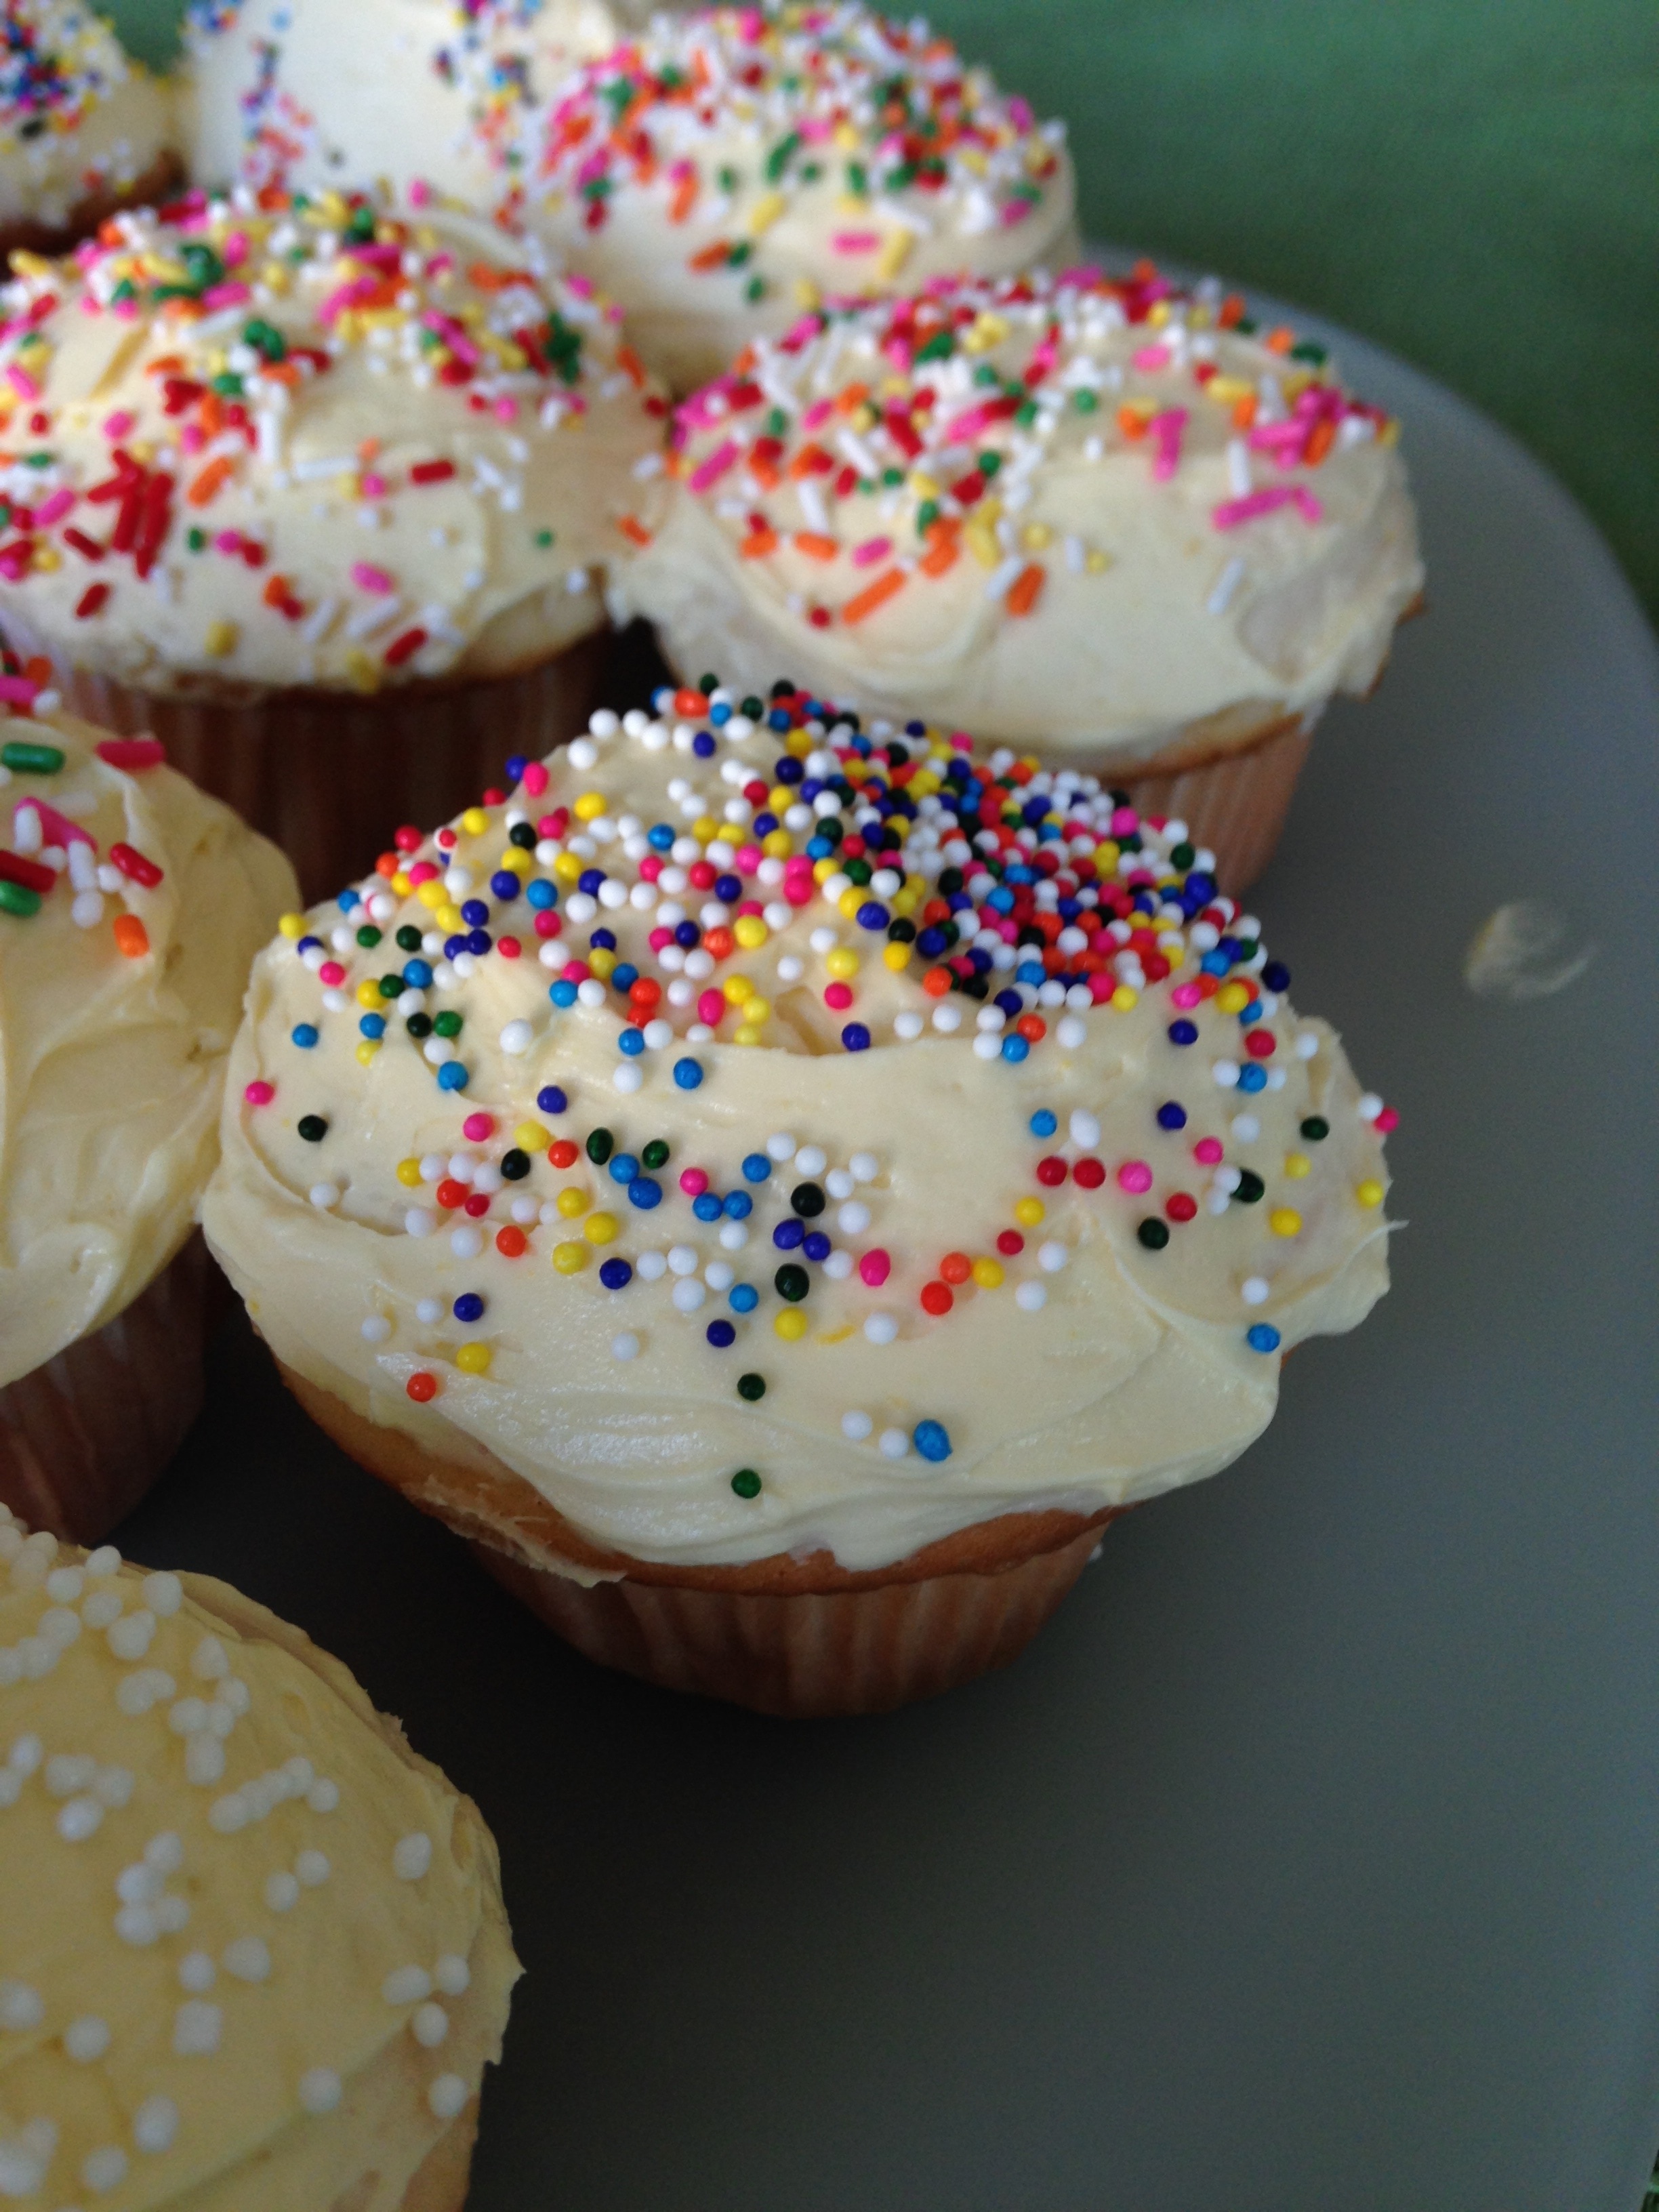 cupcakes topped with white cream and sprinkles